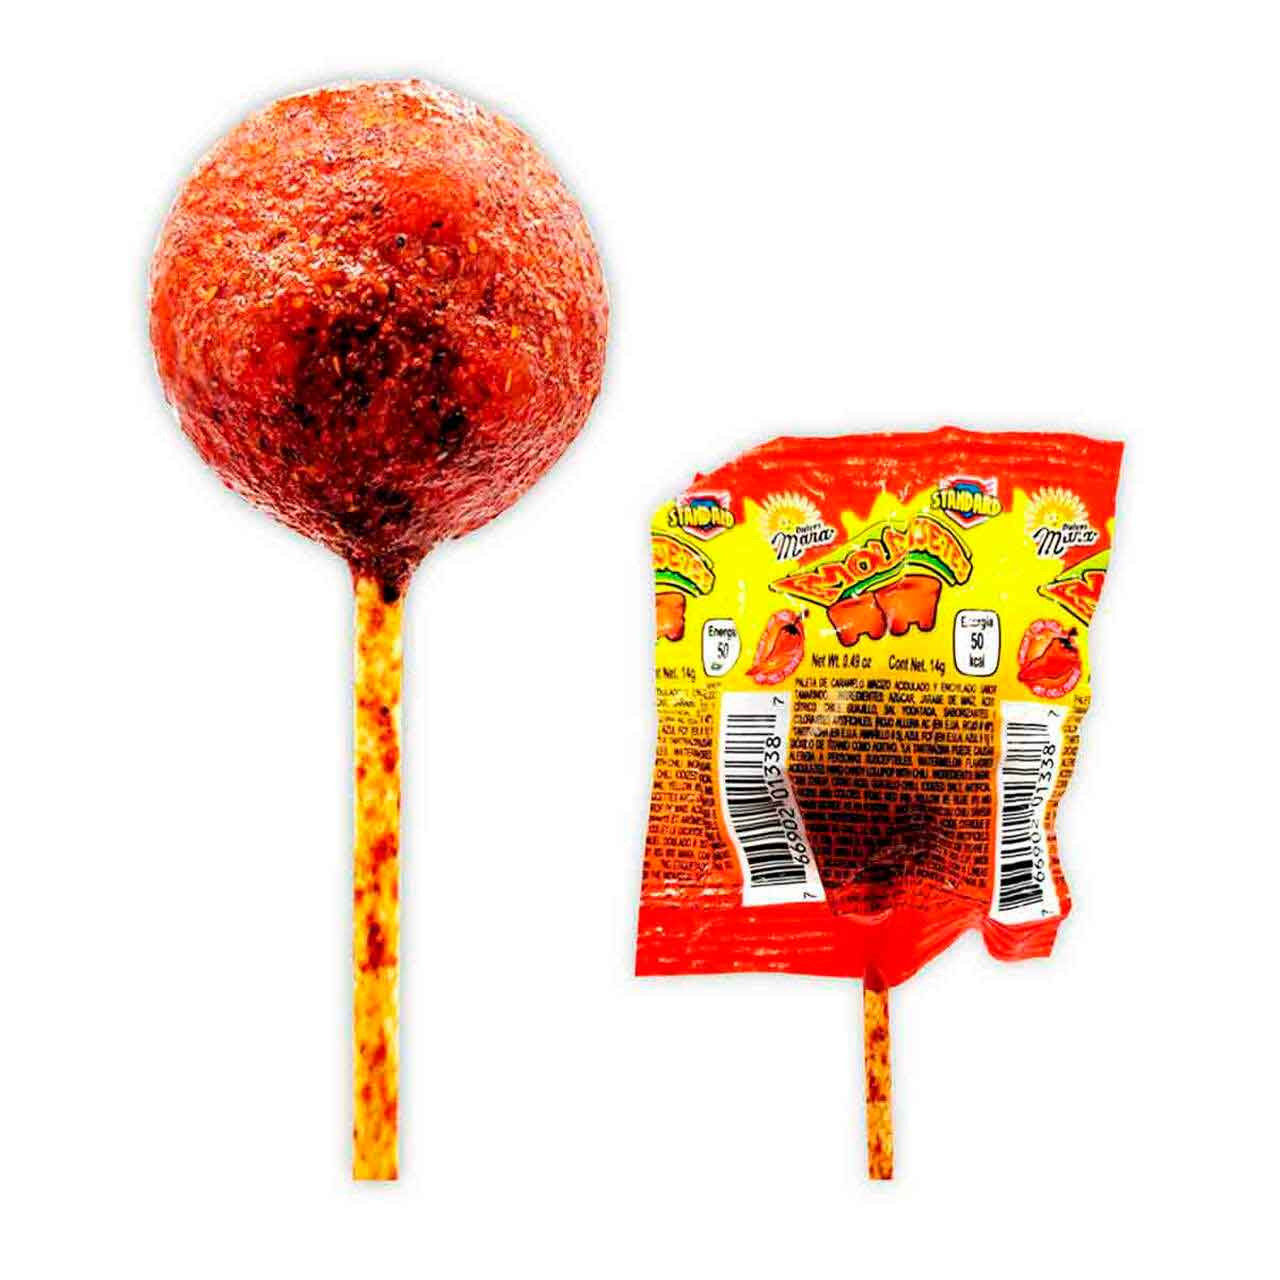 An spicy mild level of flavor combined with the rich fruity essence of tamarind. This delicious lollipop is know as one of the more traditional and typical sauce containers or makers from mexico, this are the "Molcajetes" lollipops from the Mara brand.